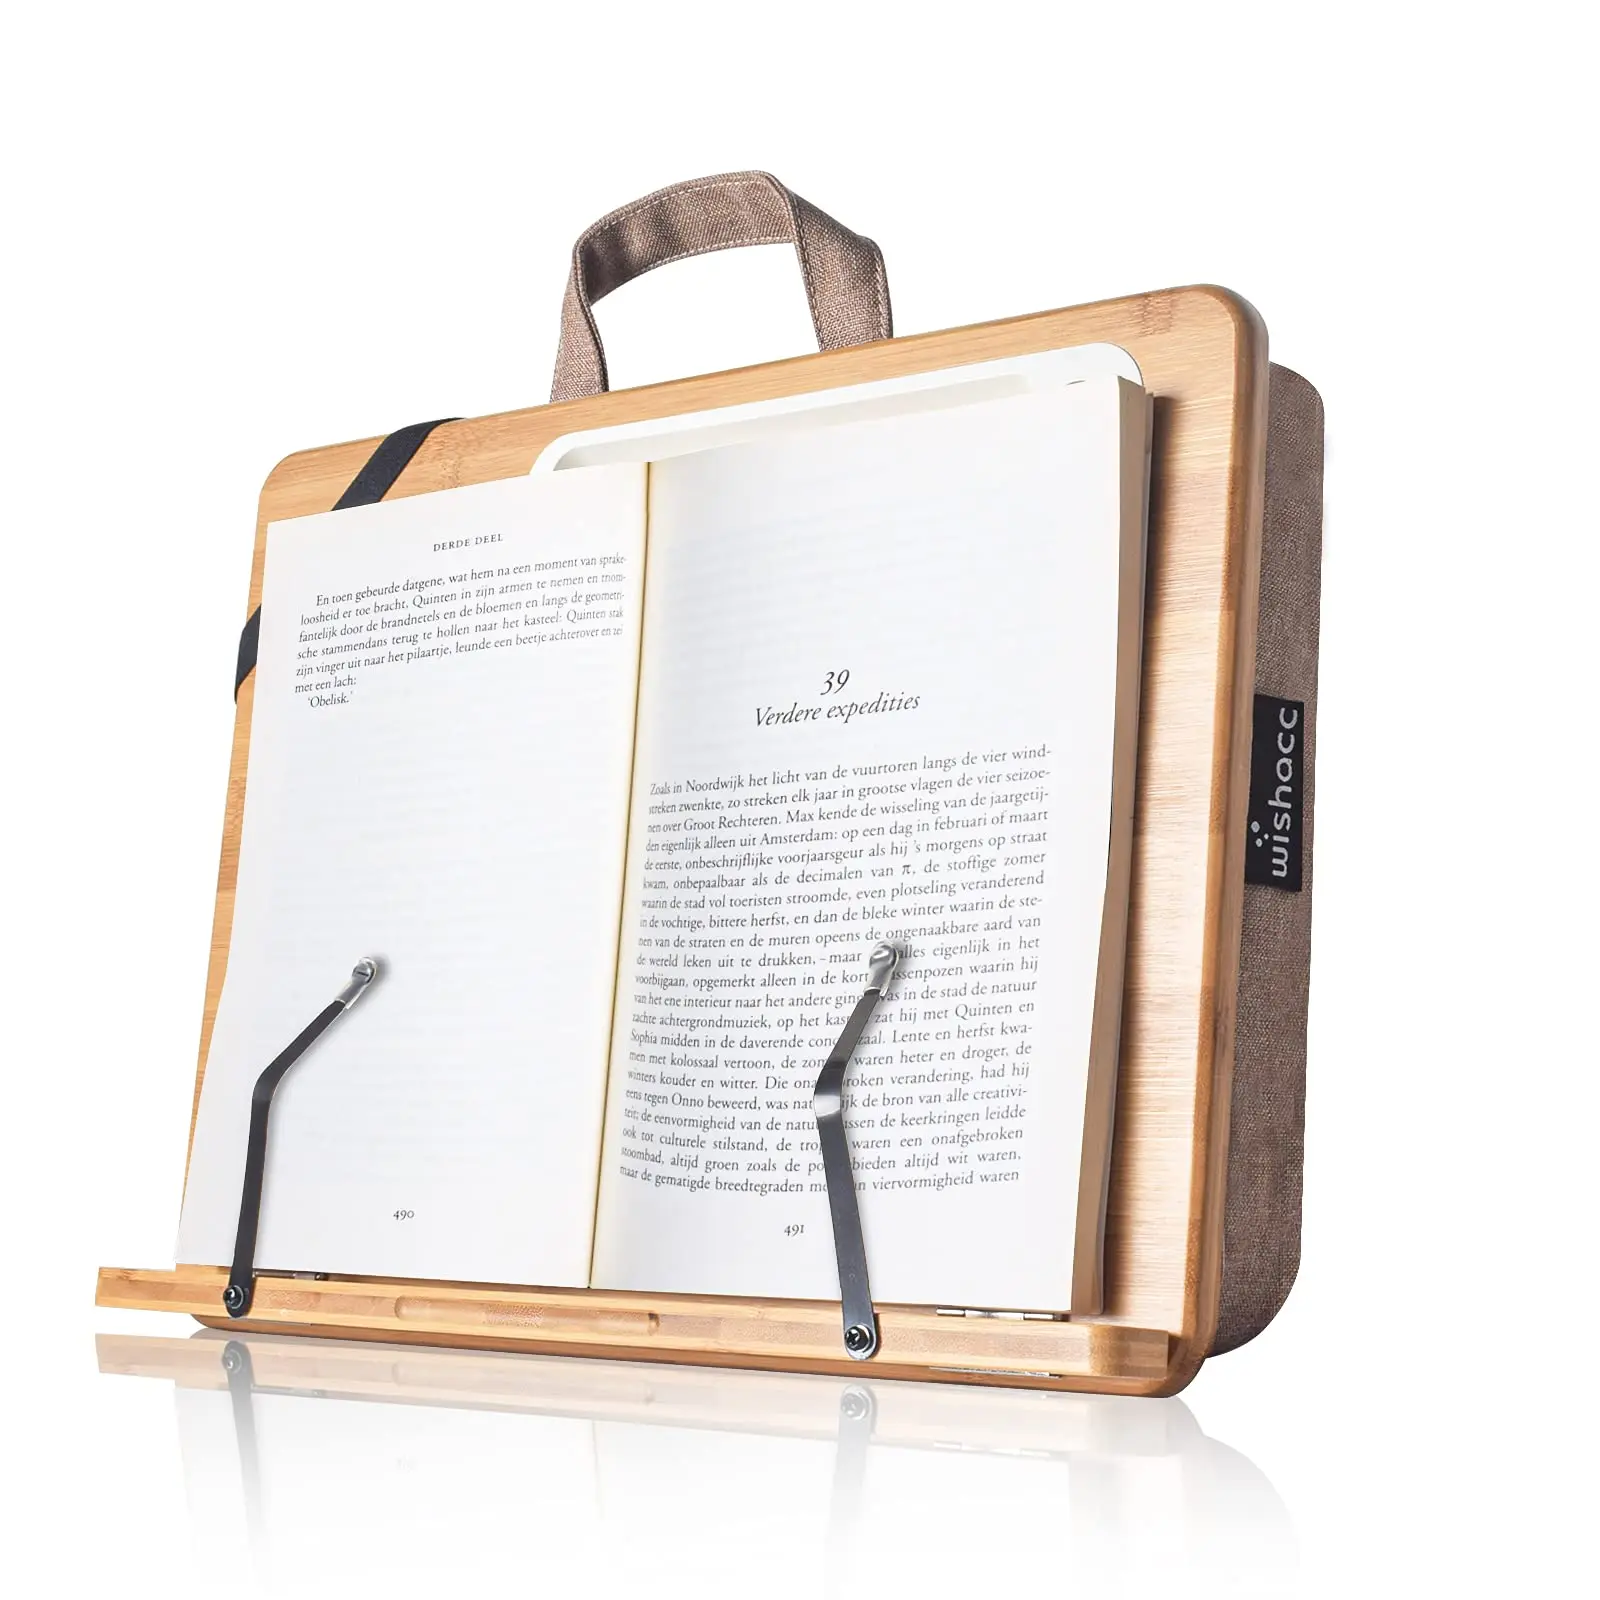 wishacc Bamboo Book Laptop Stand Bed Reading Phone Holder Tablet Laptop Holder For Iphone Ipad Macbook Air Home Computer Desk